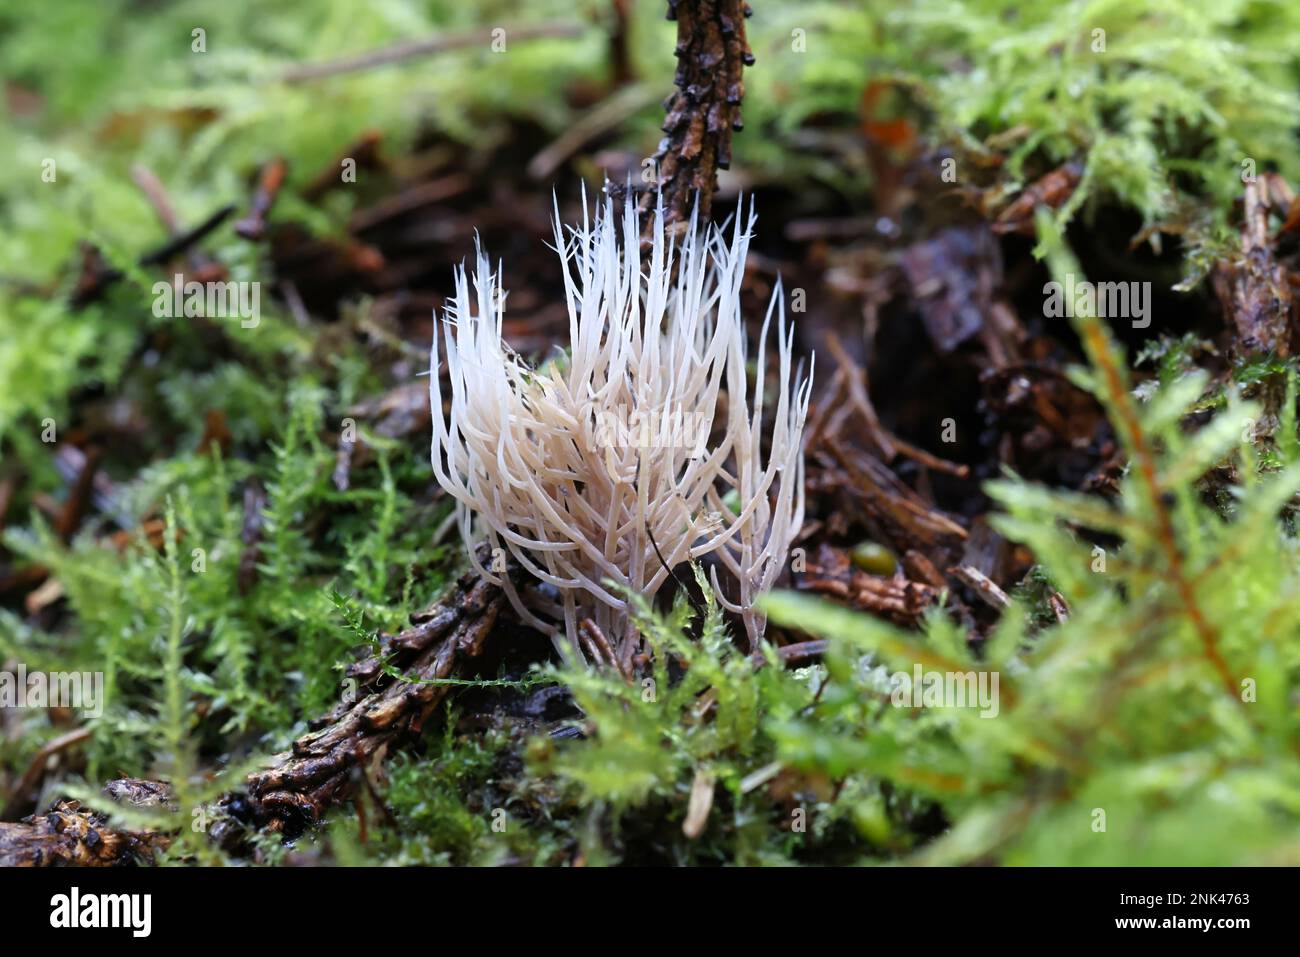 Pterula multifida, a coral fungus growing on spruce litter in Finland, no common English name Stock Photo